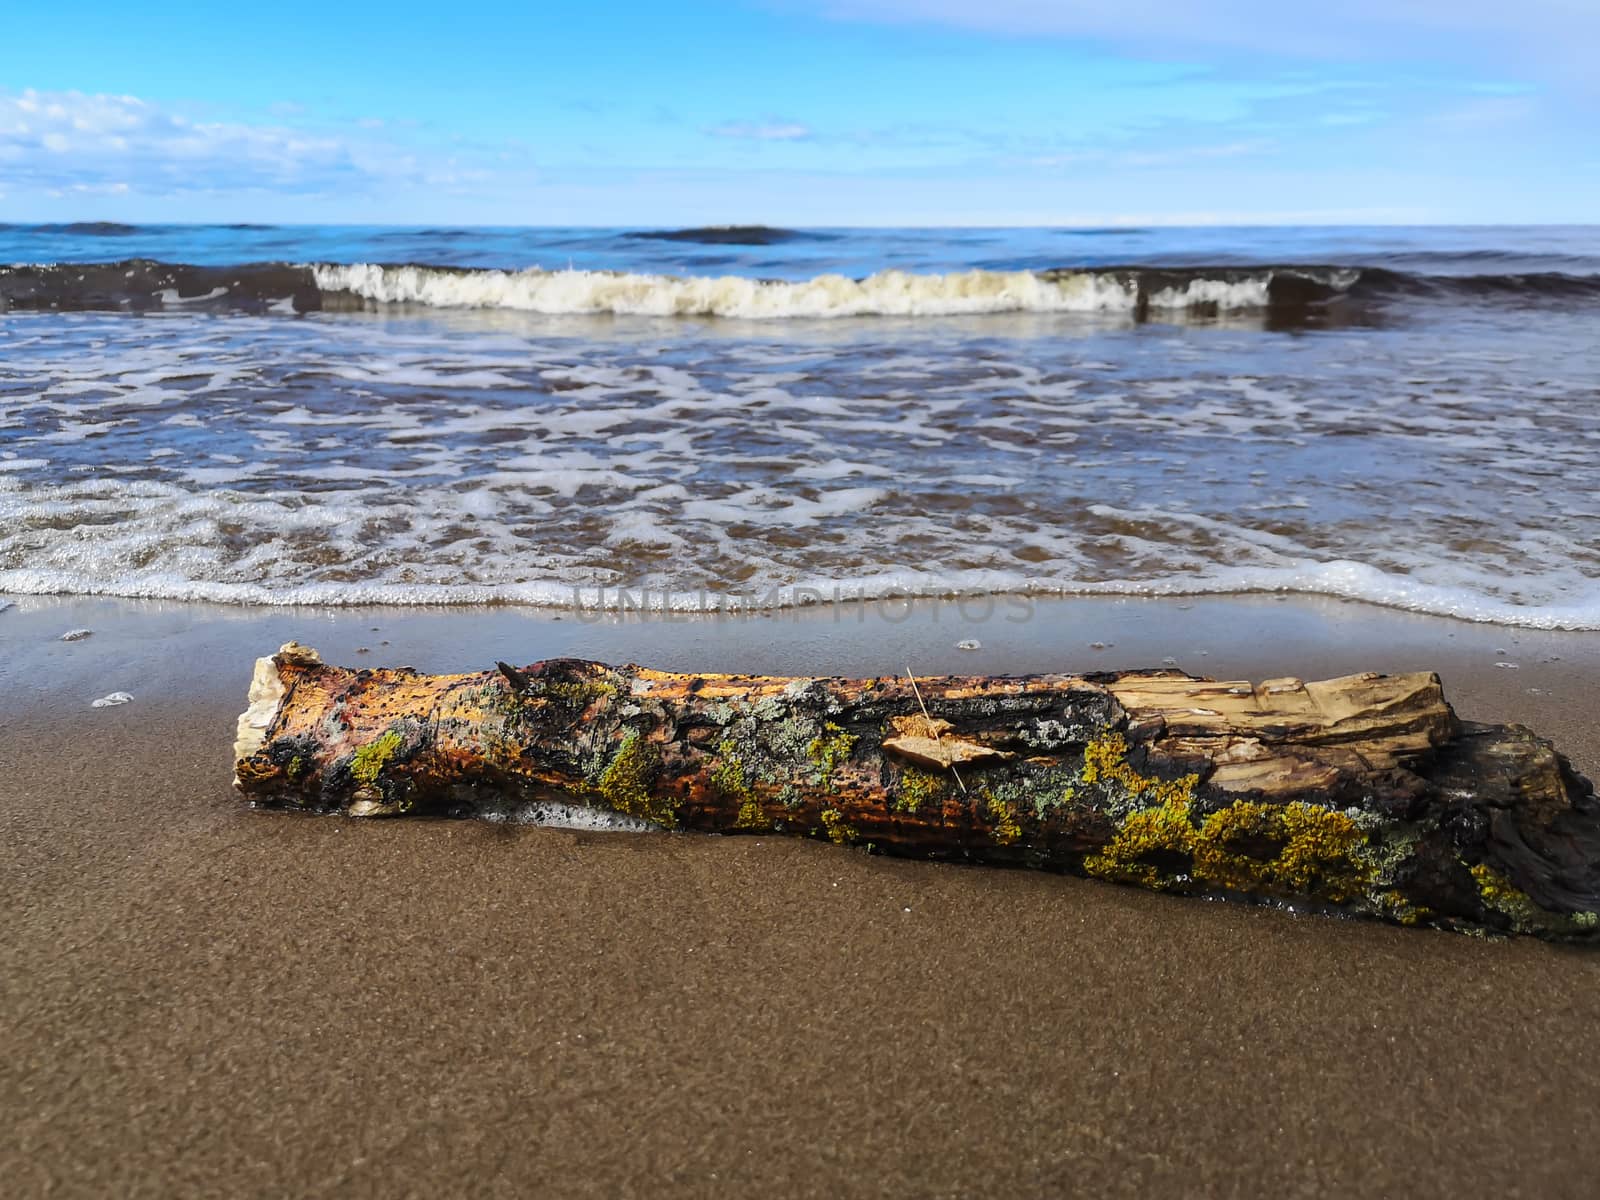 Fallen log on sand beach with Baltic sea and blue sky on background